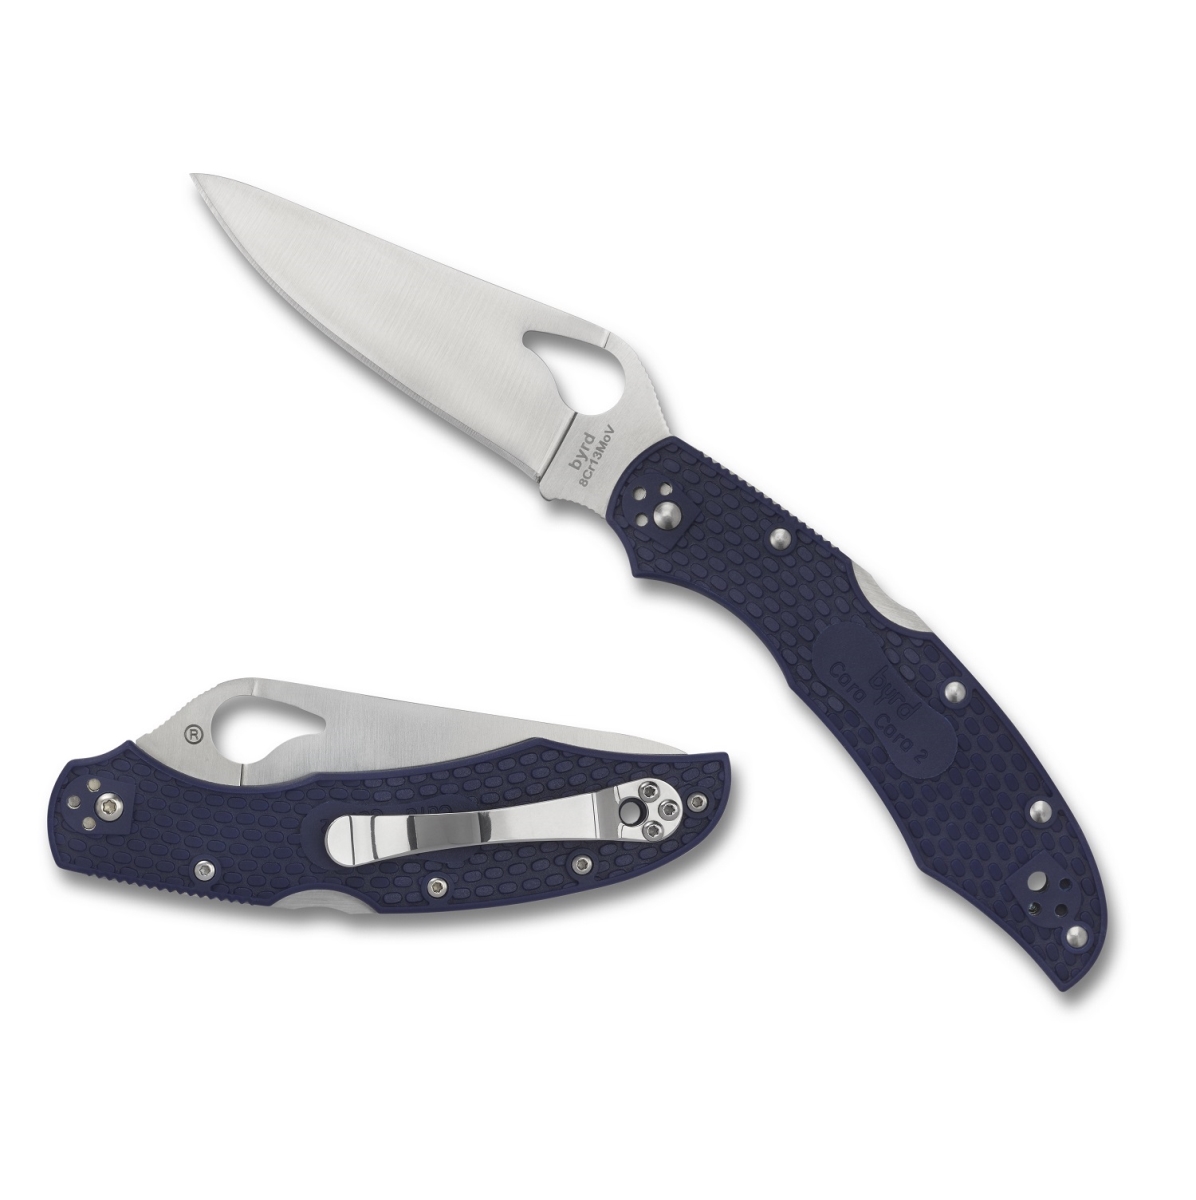 Byrd BY03PBL2 3.8 in. Cara Cara2 Folding Plain Blade with Blue FRN Handle